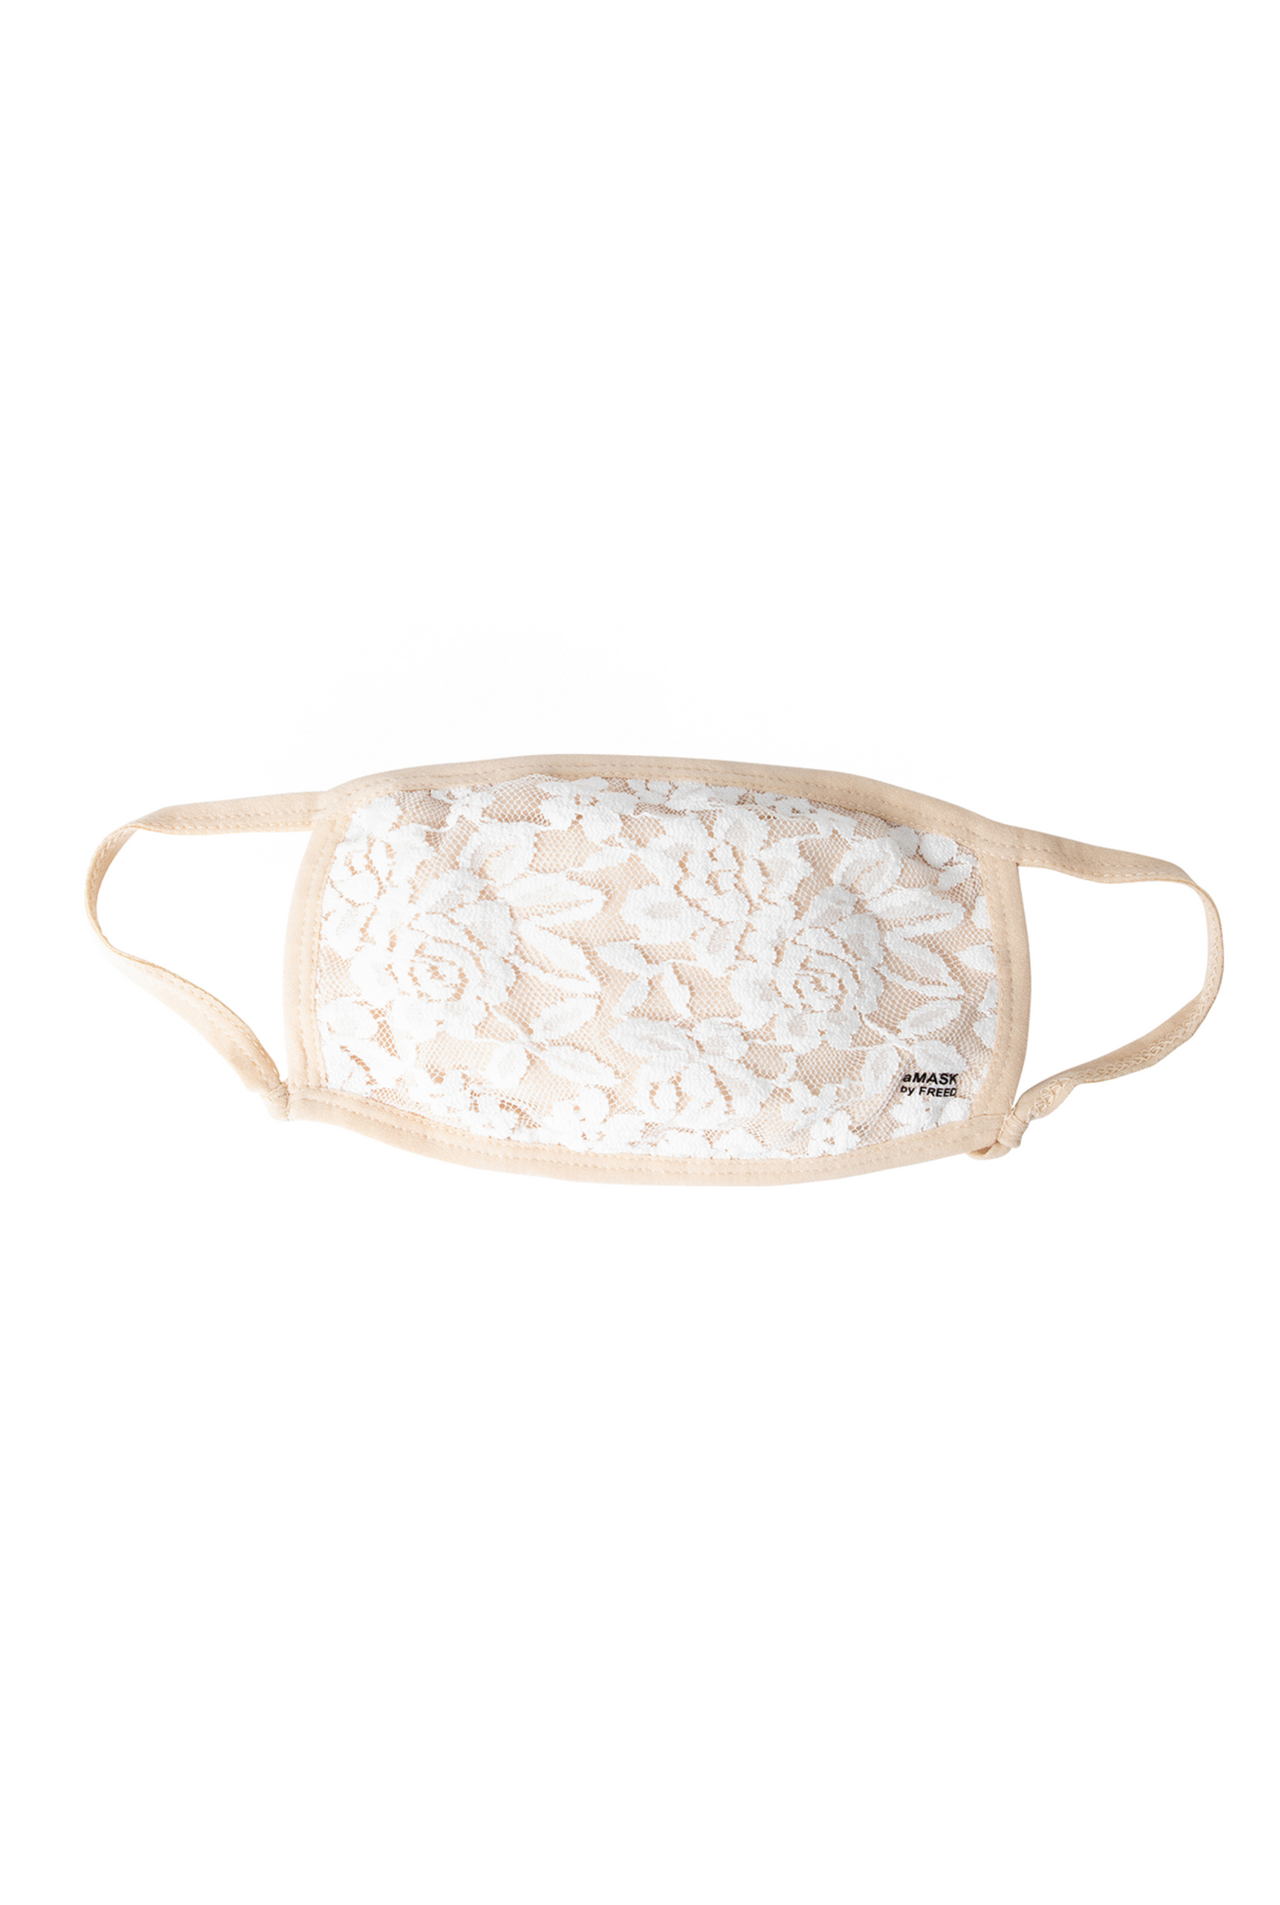 WHEAT MASK WITH WHITE LACE - ADULT FACE MASK